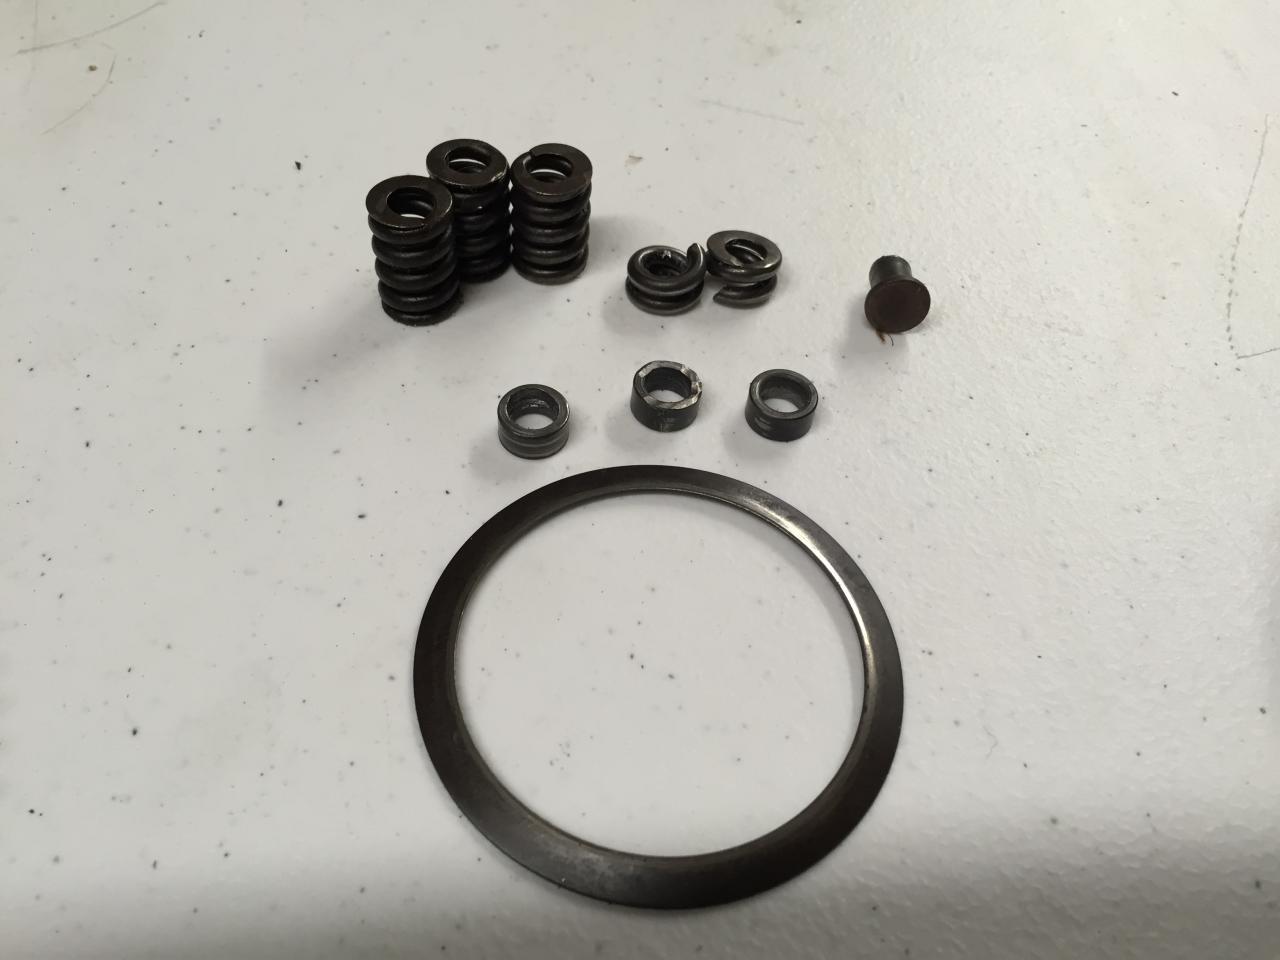 IMG 17- Here are what's left of original cush springs, only 4 out of six and 1 spring in pieces. The 3 steel washers in the middle, belong between the